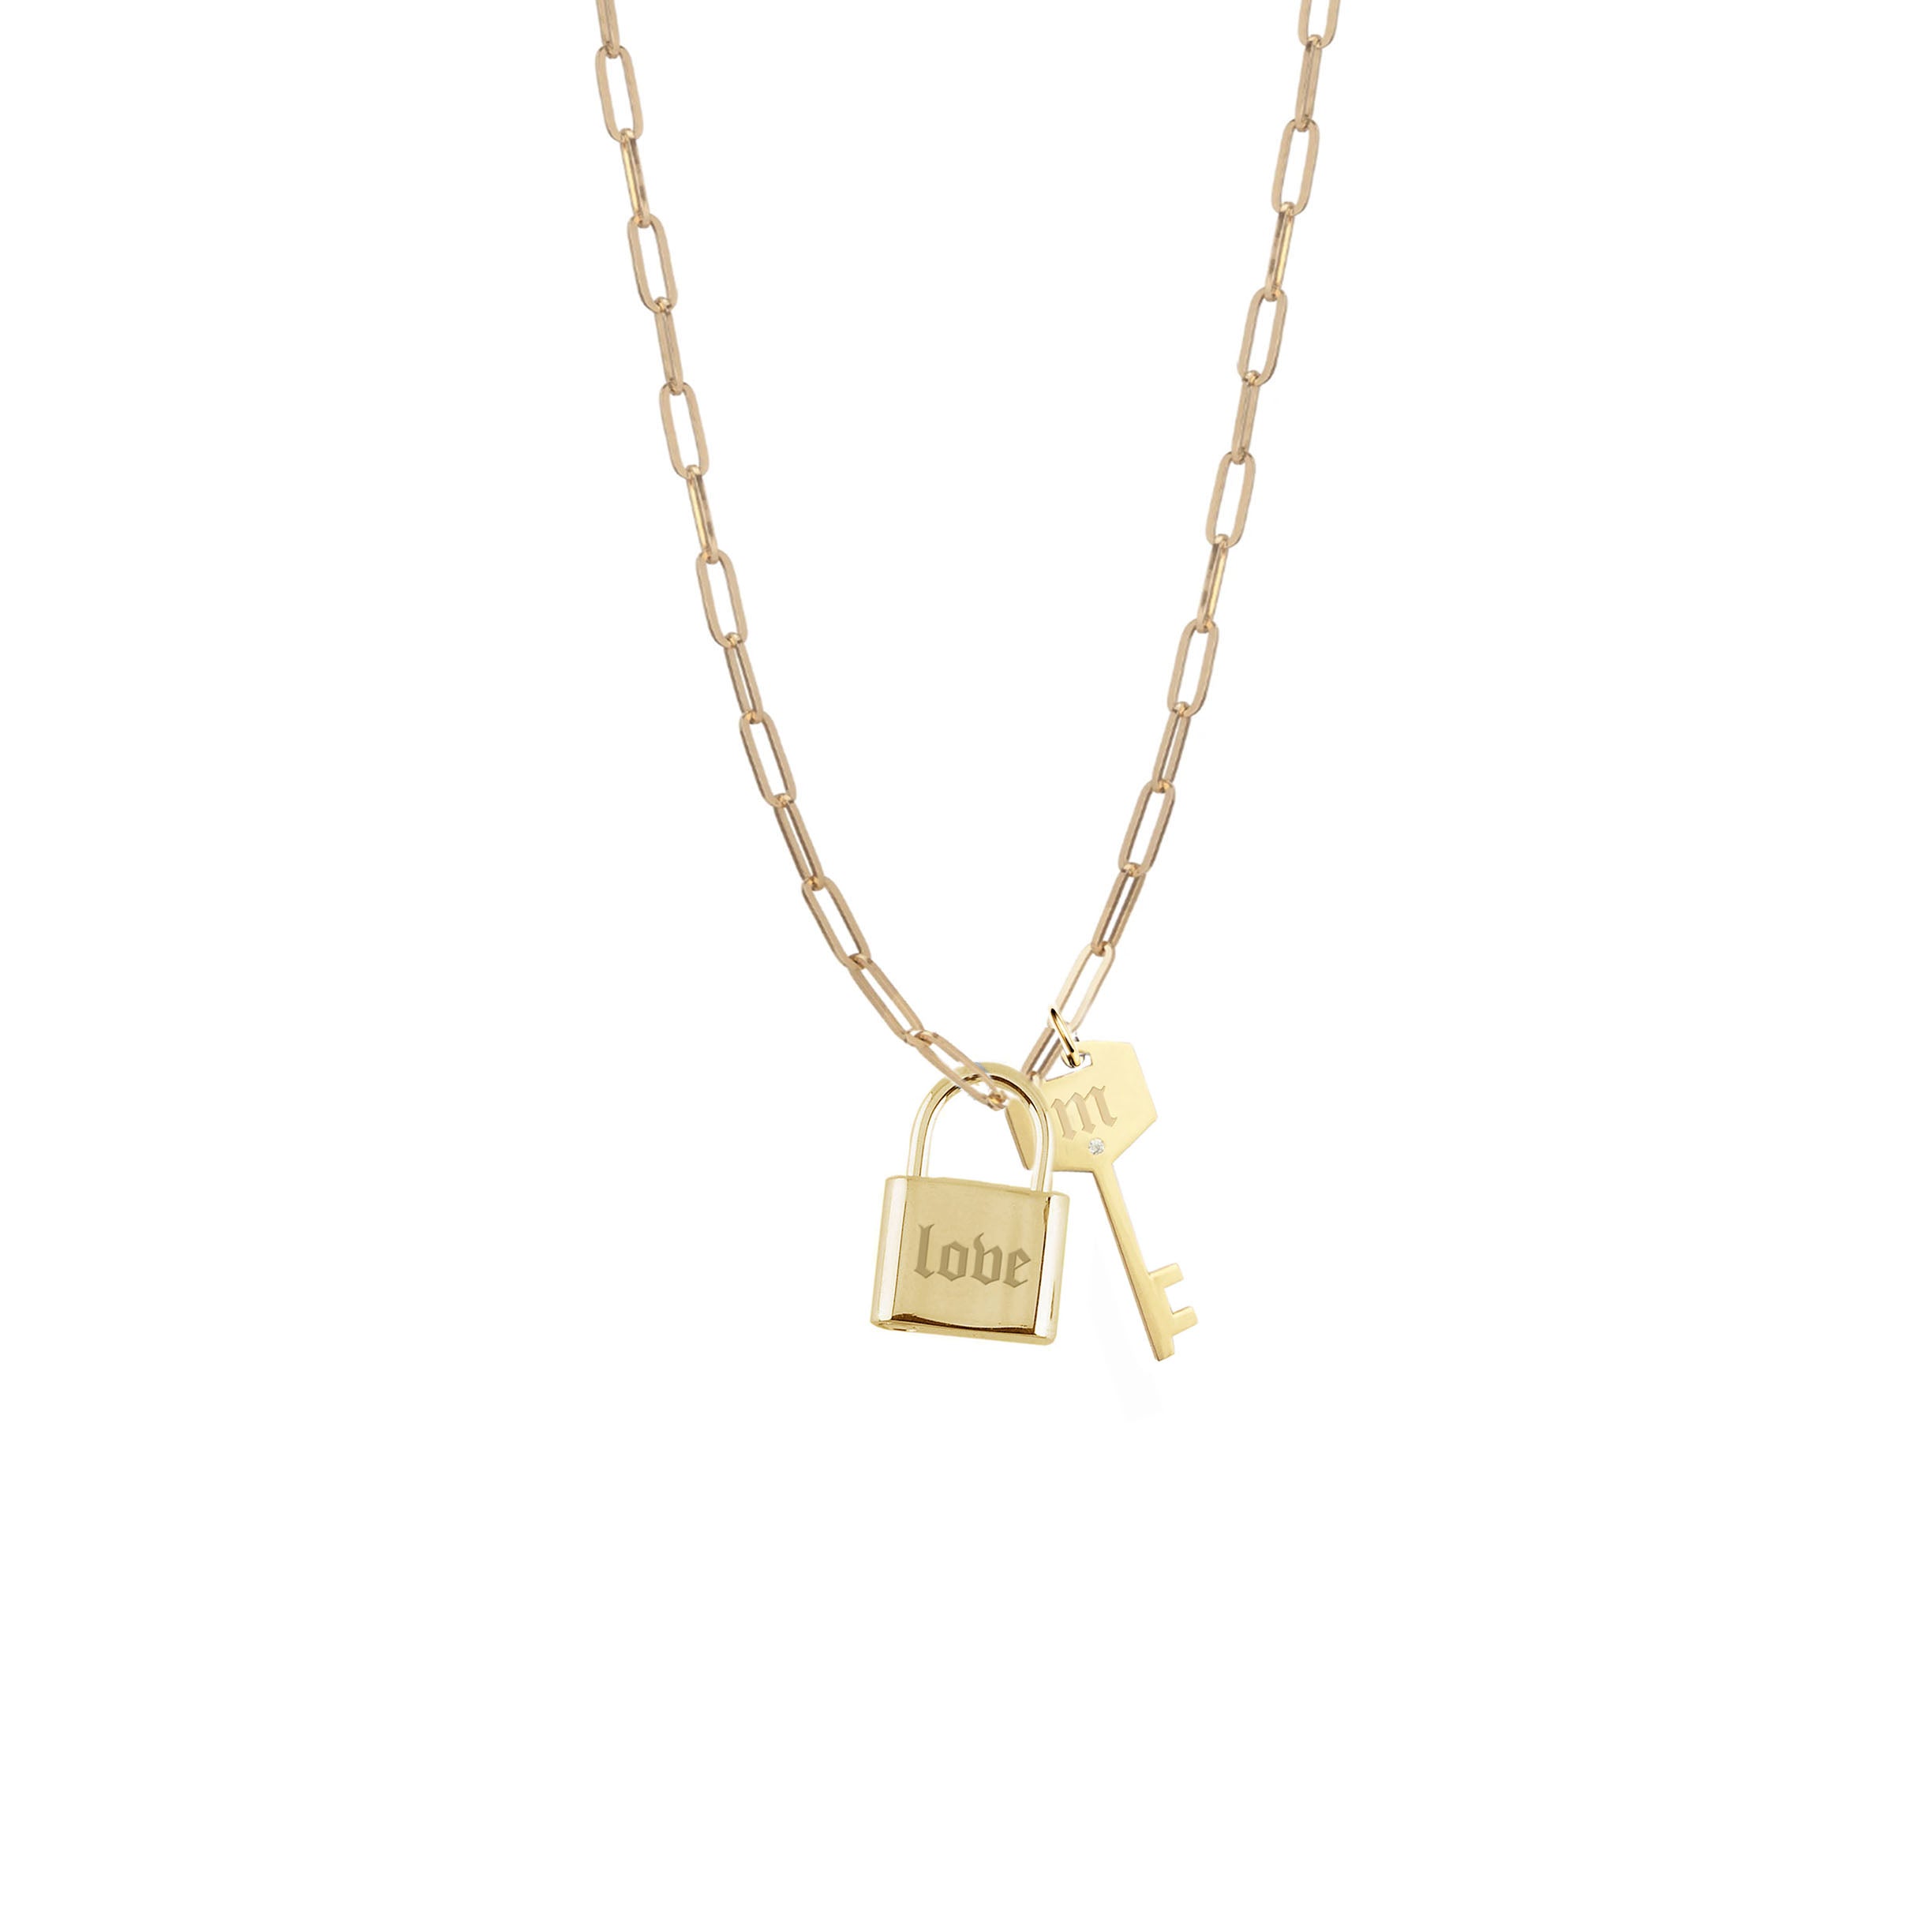 Luana Coonen- Tiny Love Lock Necklace with Key | The Gold Hammer